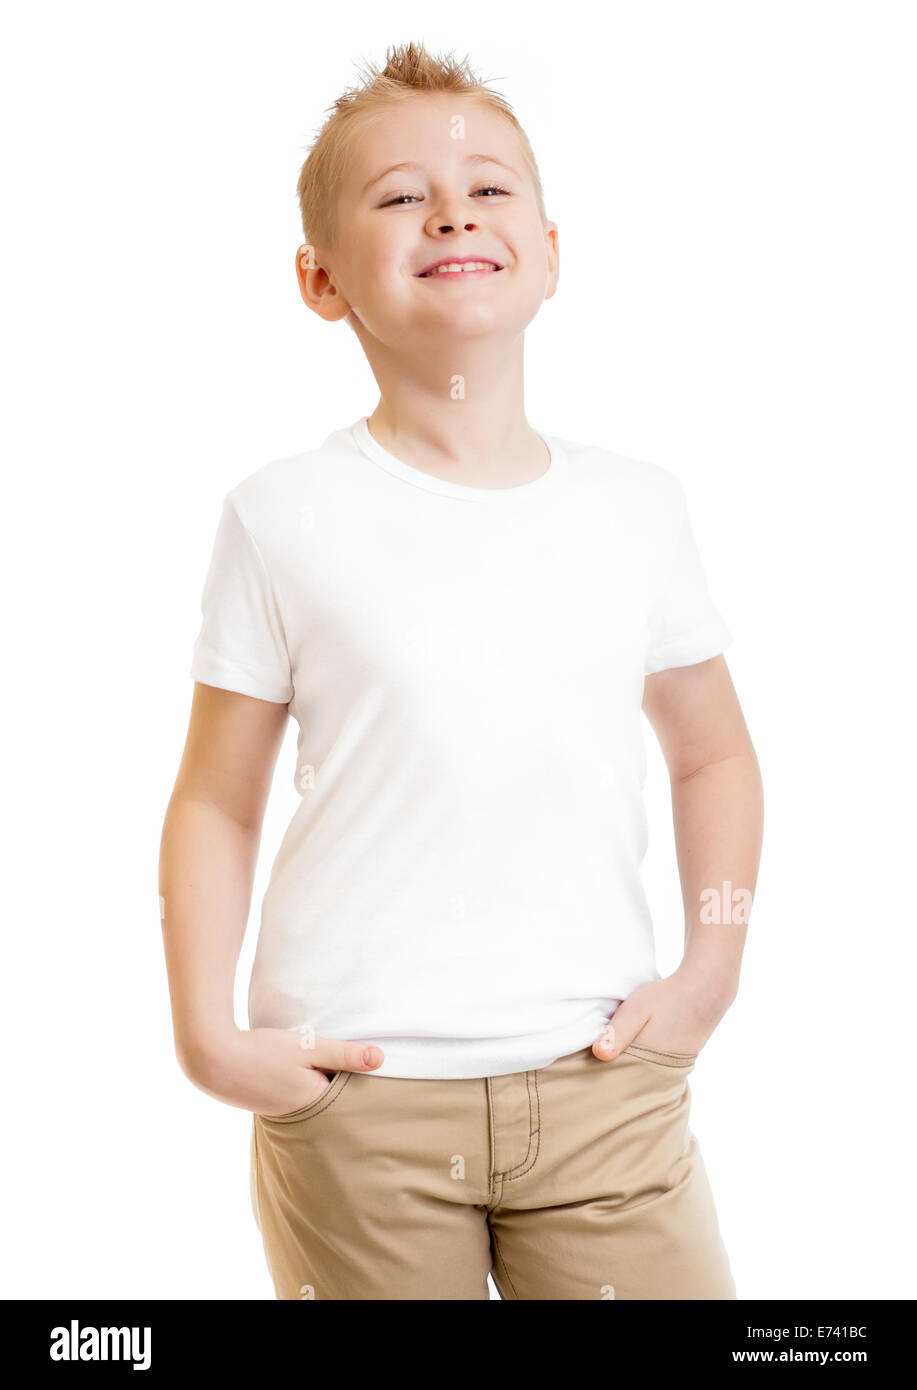 model kid in t-shirt or tshirt isolated on white Stock Photo